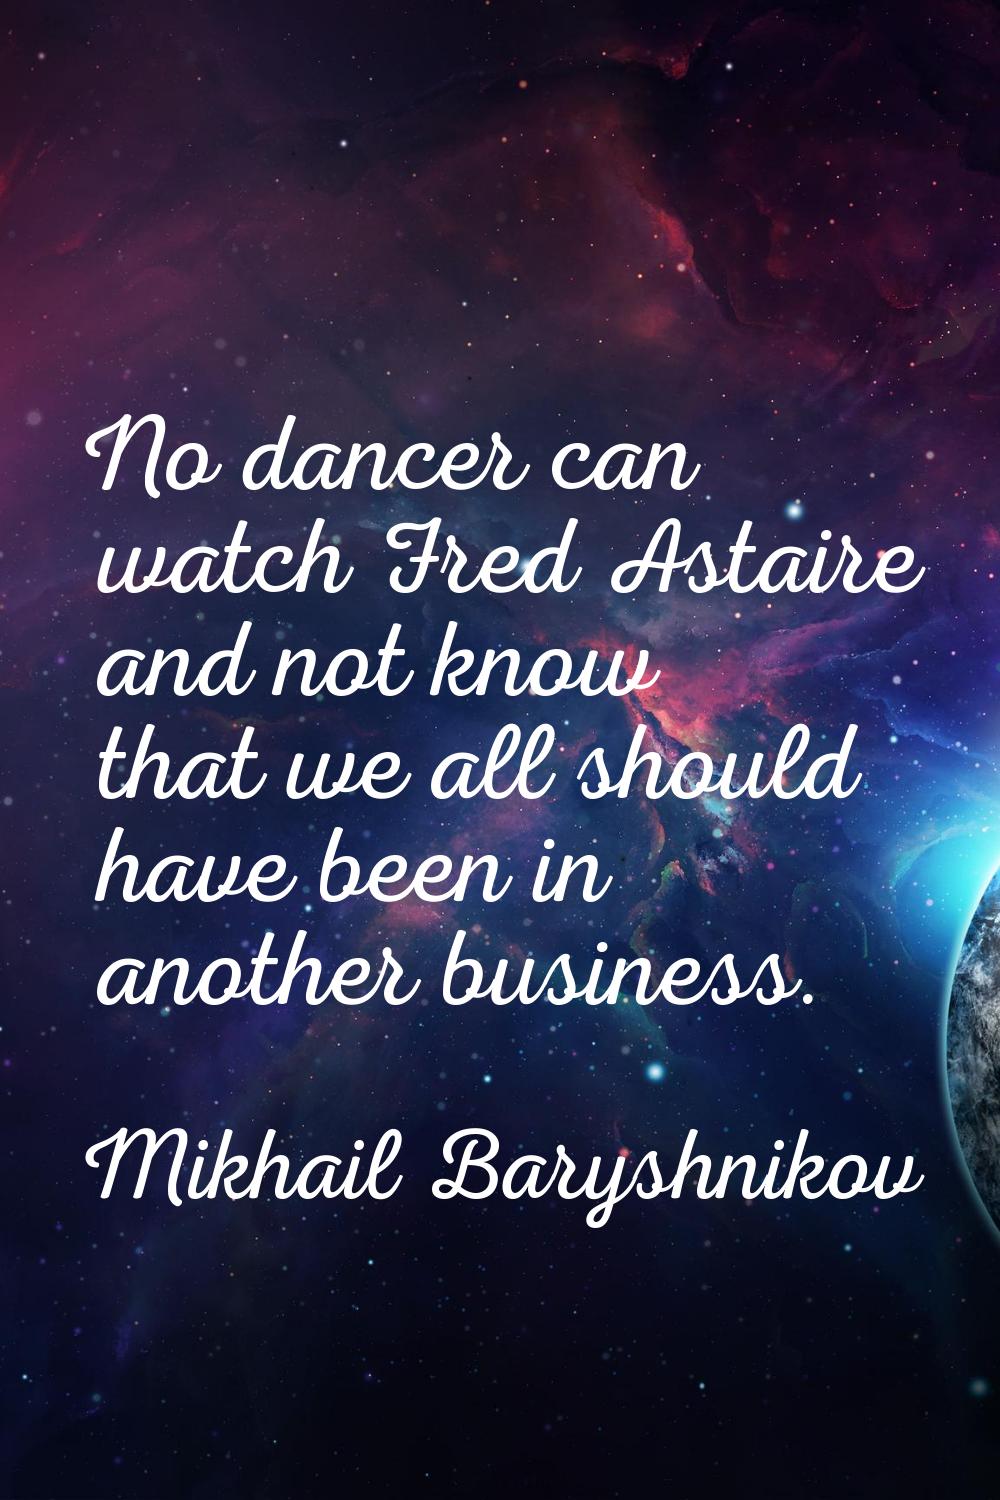 No dancer can watch Fred Astaire and not know that we all should have been in another business.